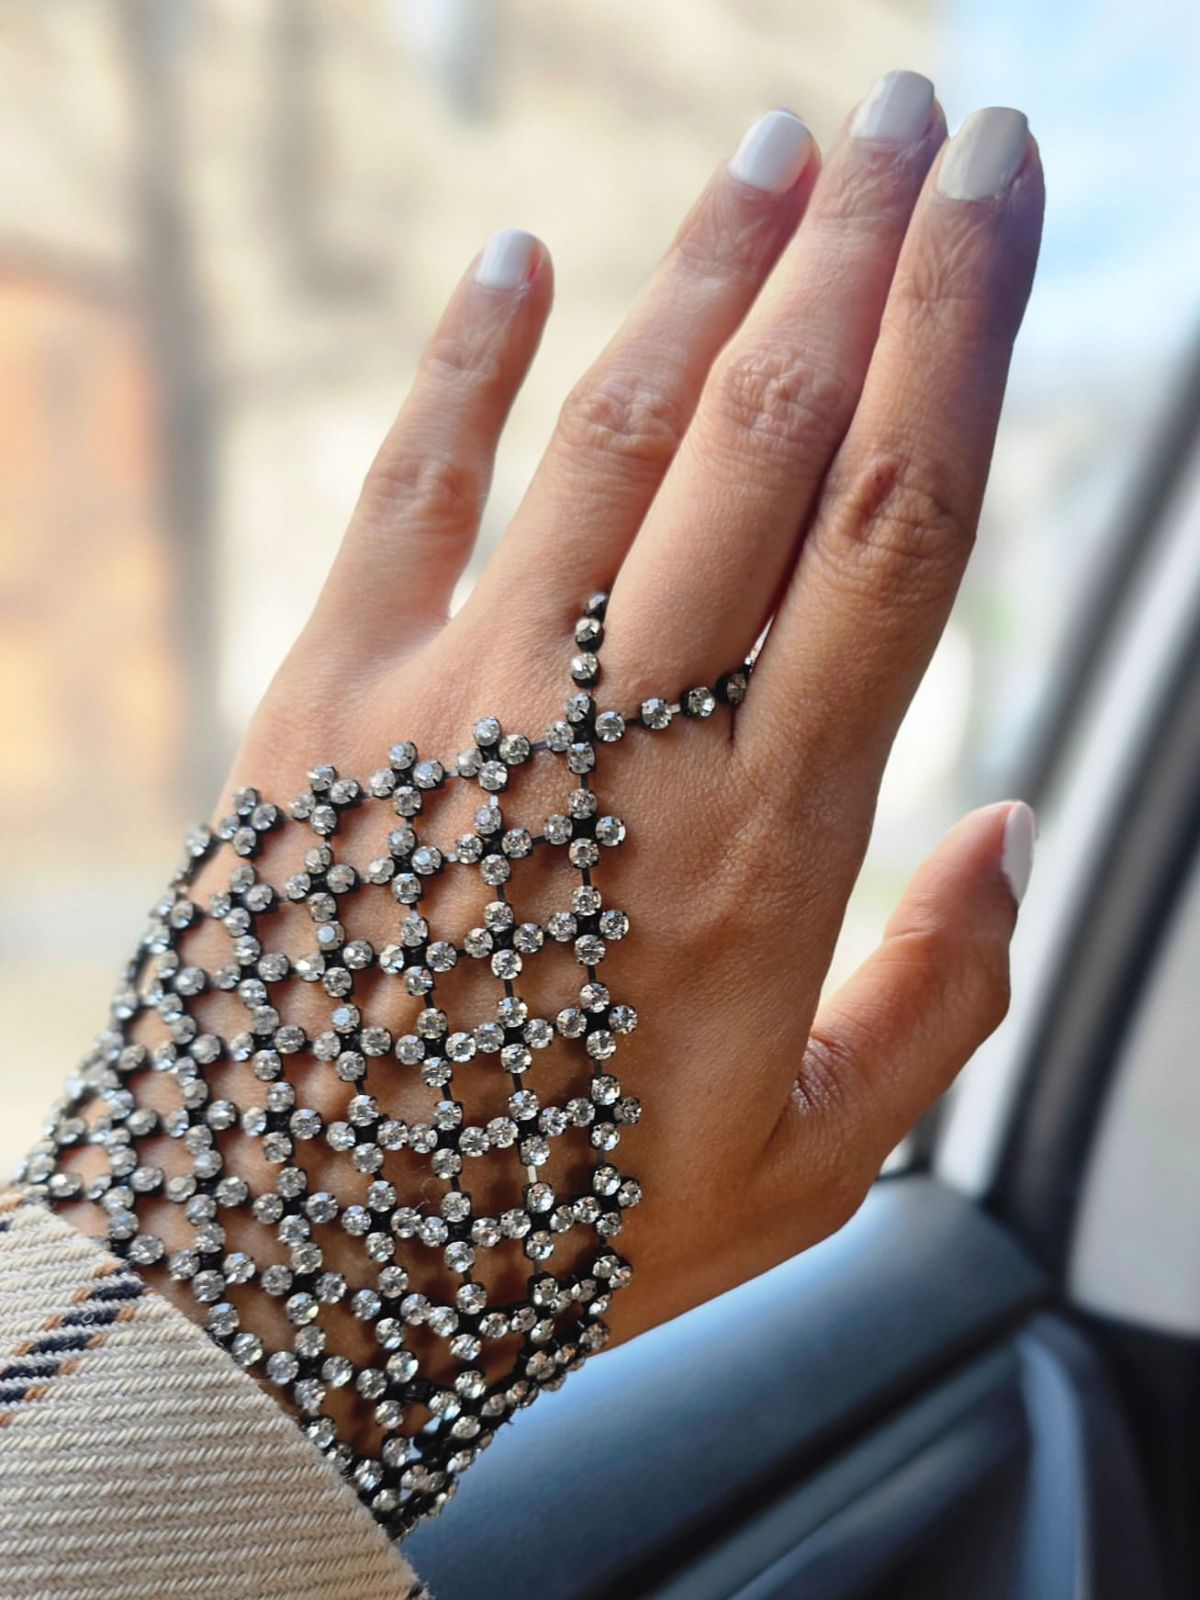 Buy that woman Rhinestone Ring Bracelets Crystal Wedding Bangle Hand Chain  Silver Finger Ring Link Bracelet Sparkly Full Hand Harness Slave Chain Hand  Jewelry at Amazon.in